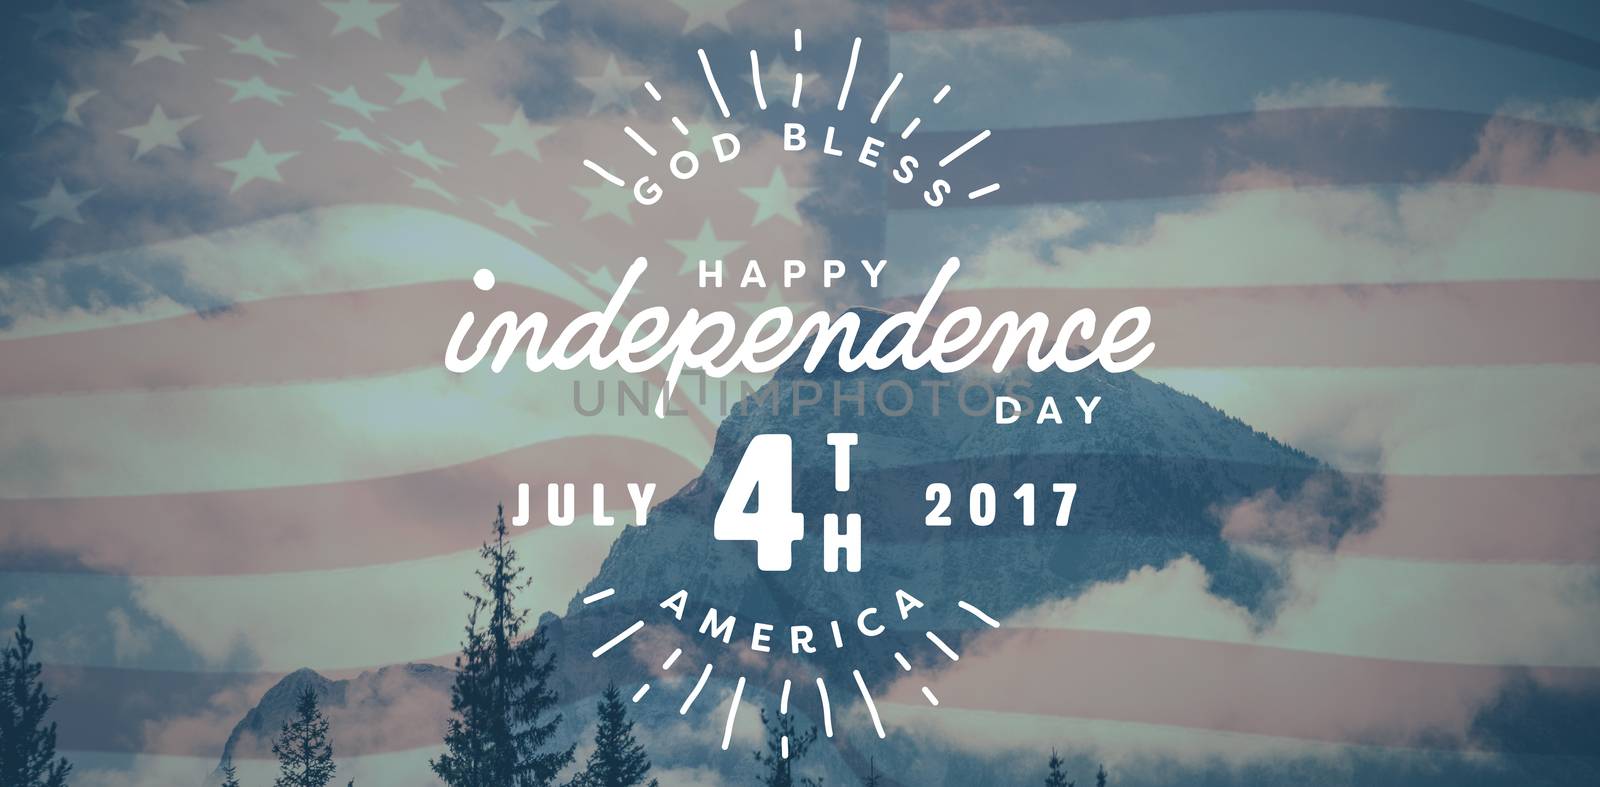 Digitally generated image of happy 4th of july text against snowy mountain range against sky